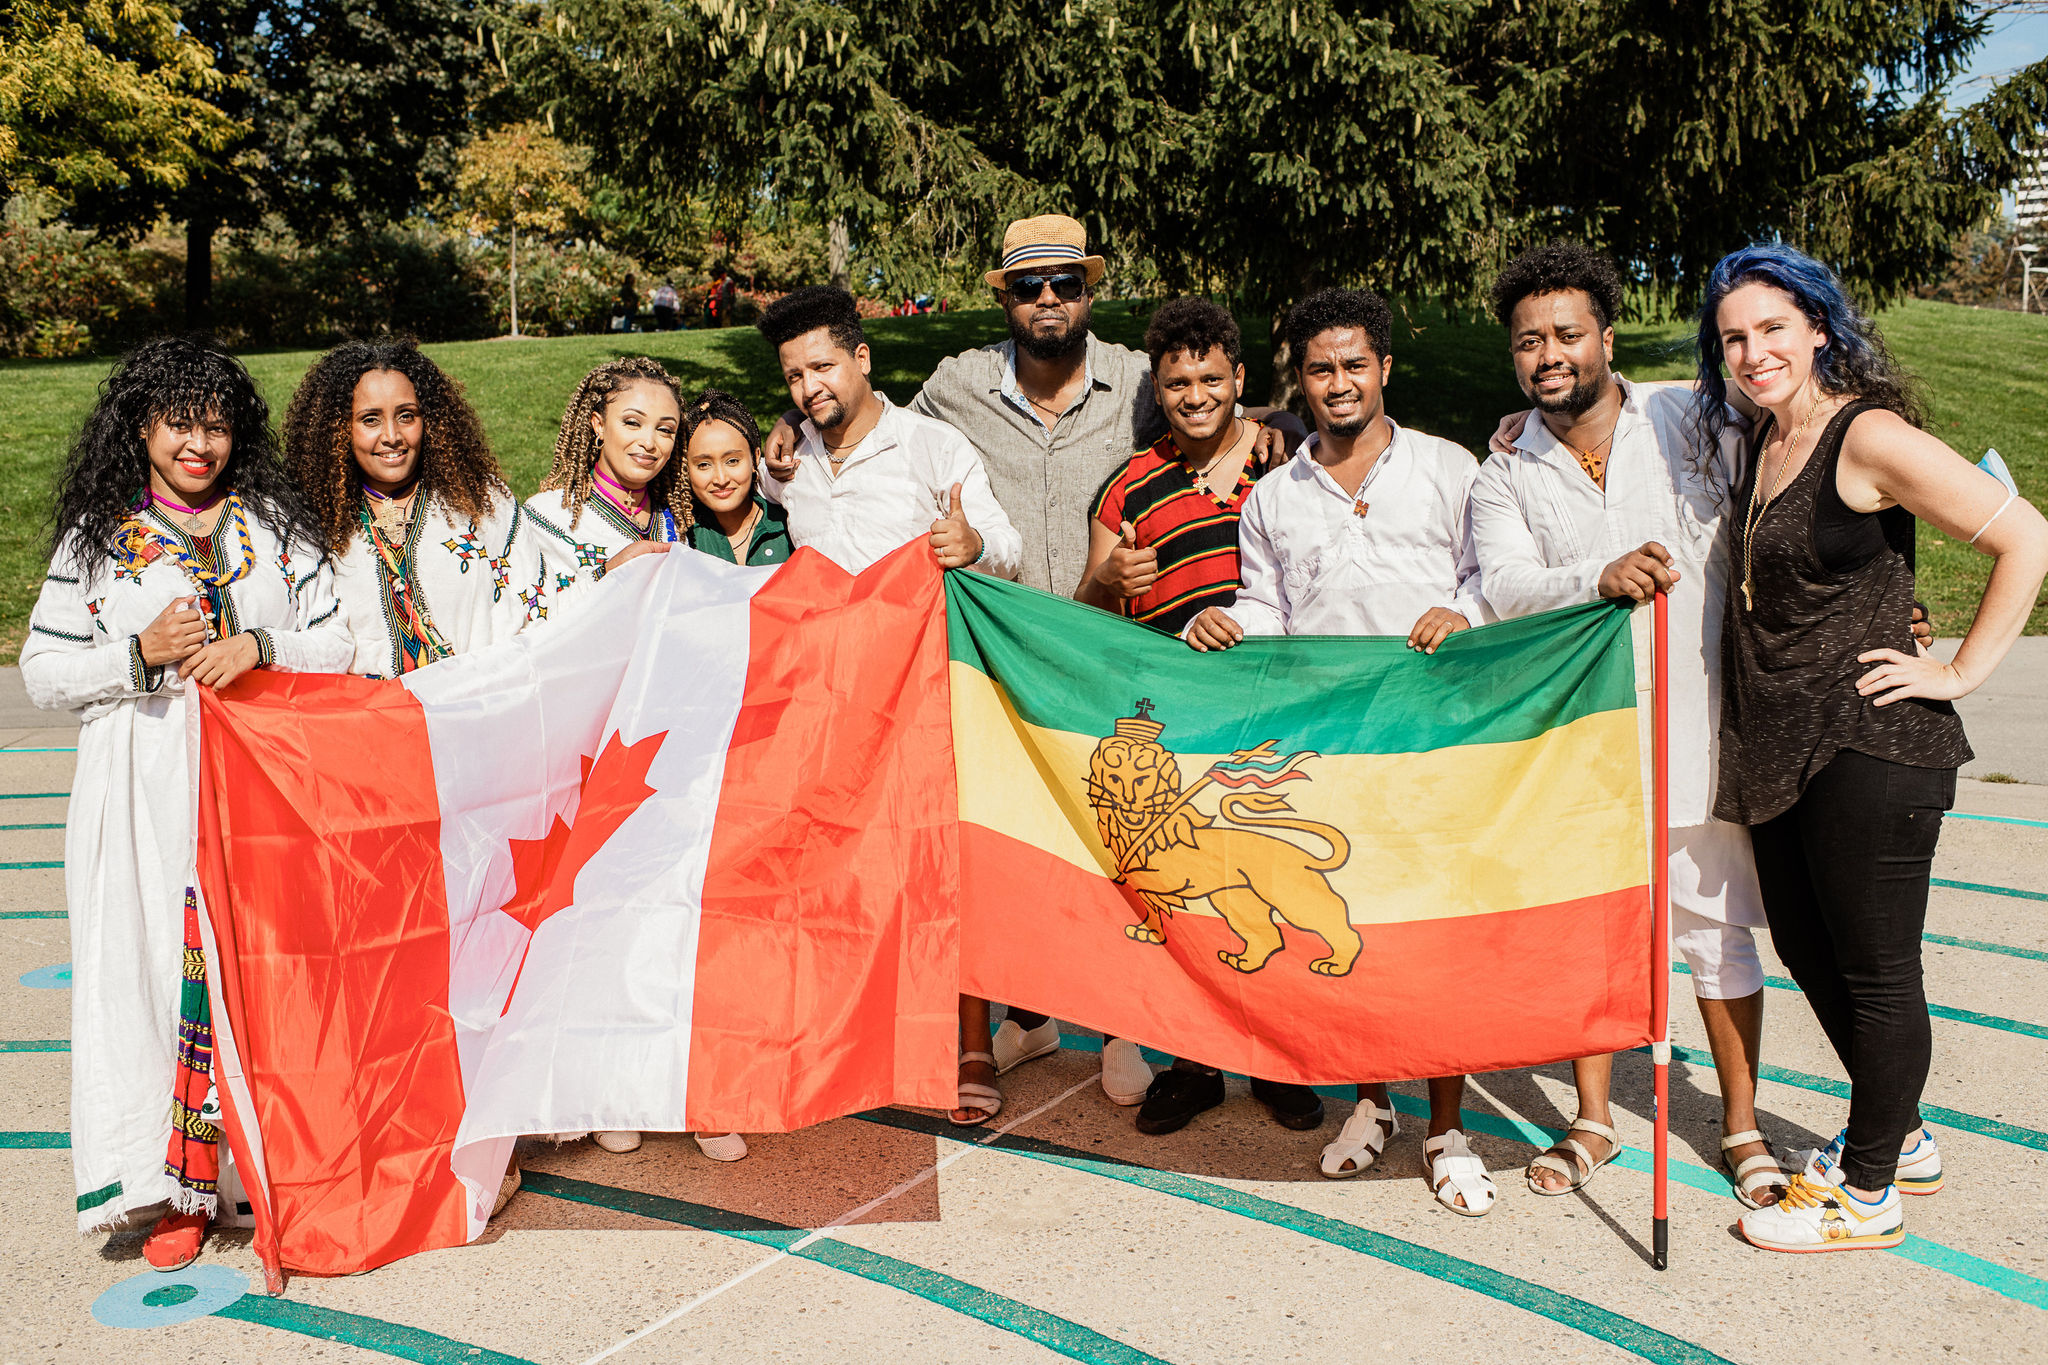 Performers stand next to each other holding up a Canadian flag and Ethiopian flag next to each other. They look directly at the camera and smile.